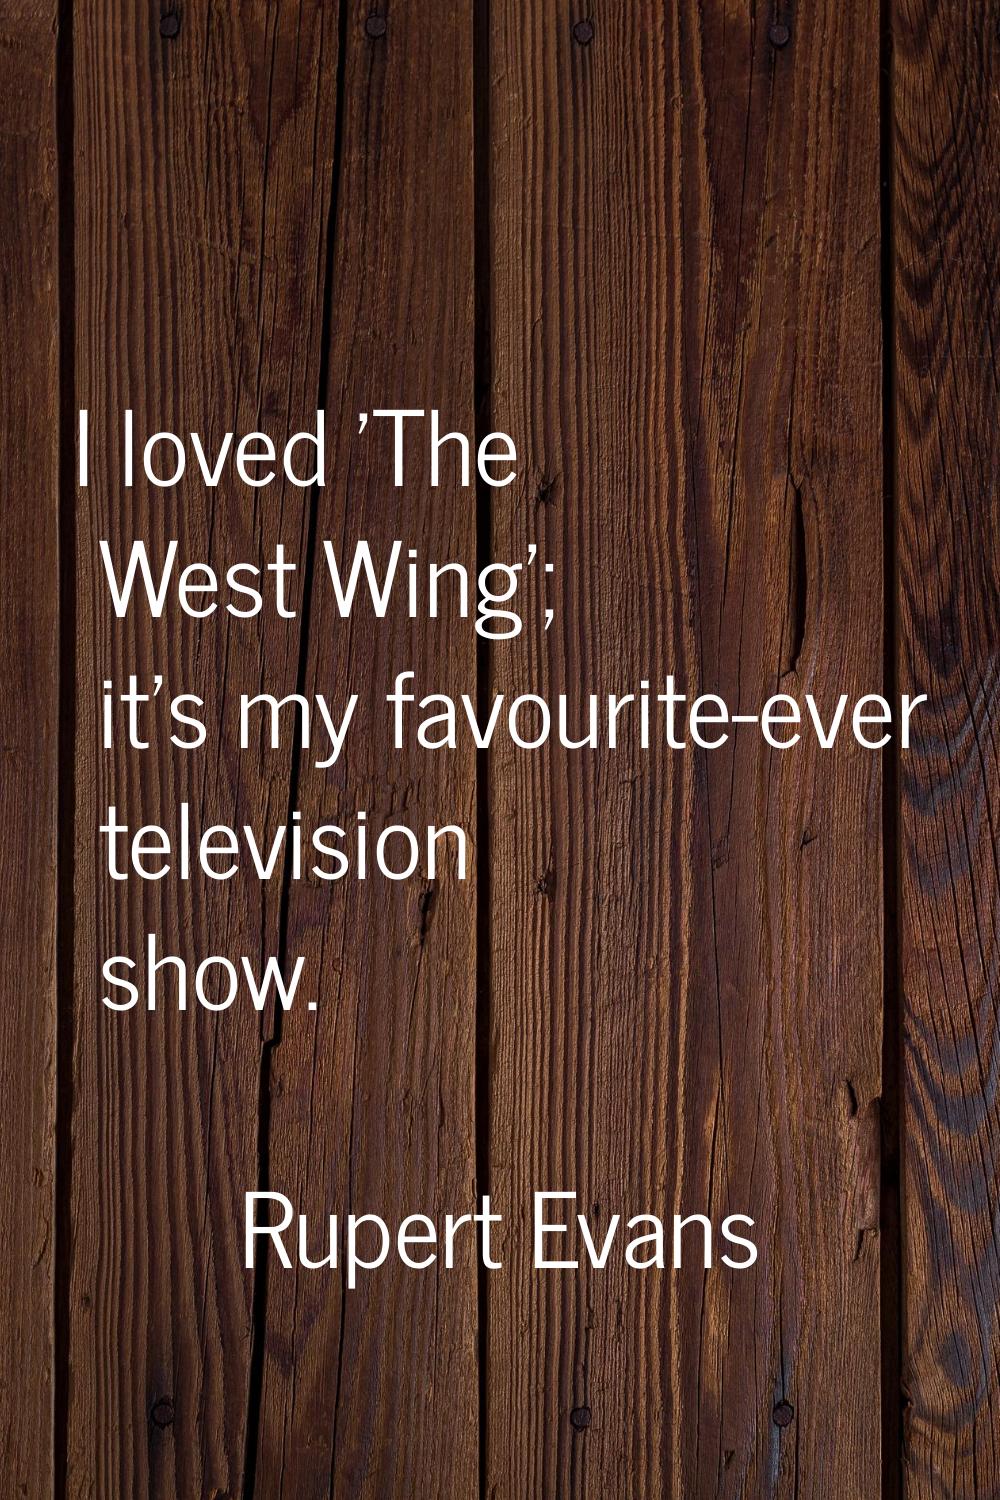 I loved 'The West Wing'; it's my favourite-ever television show.